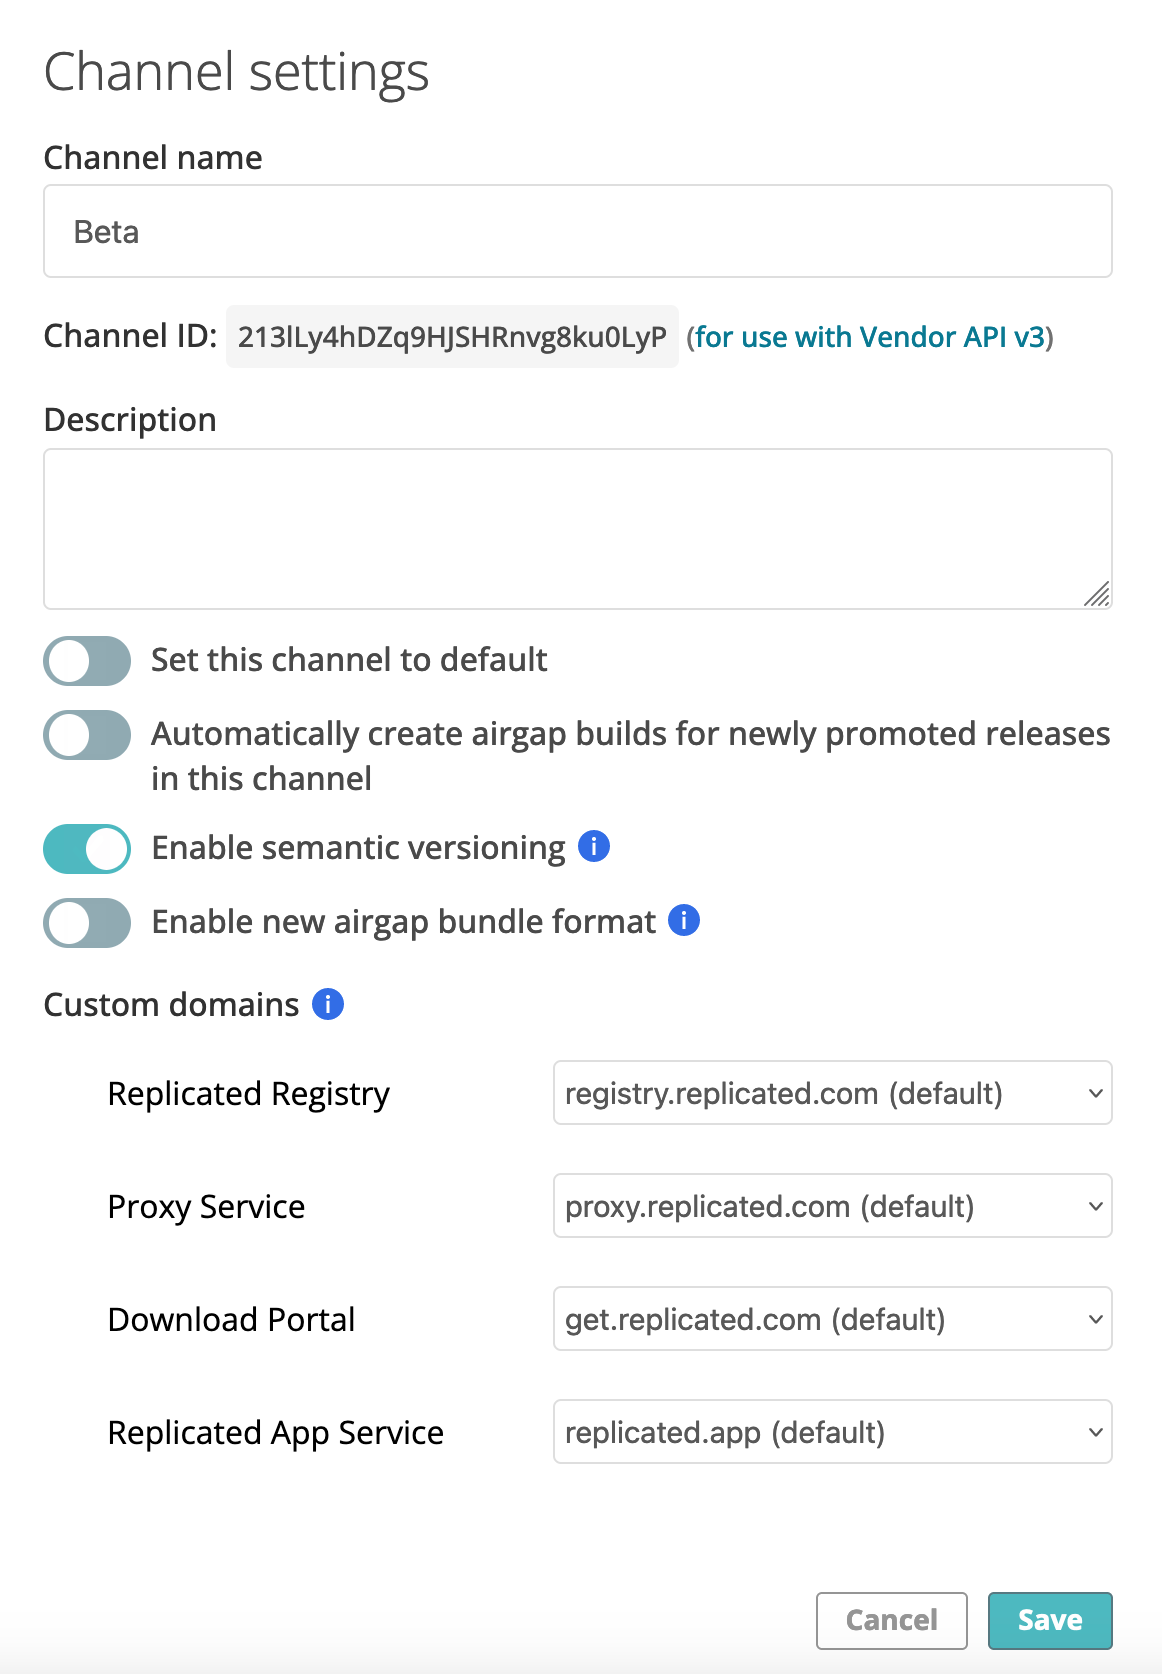 Channel Settings dialog in the vendor portal